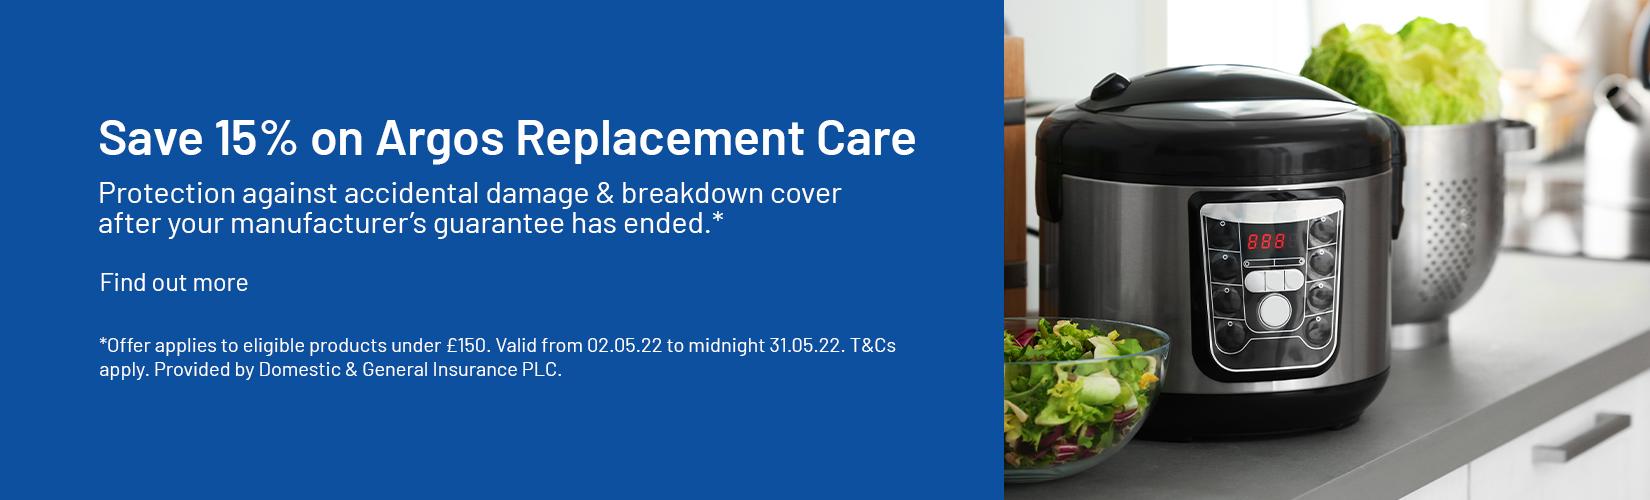 Save 15% on Argos Replacement Care. Protection against accidental damage & breakdown cover after your manufacturer’s guarantee has ended.* Find out more.